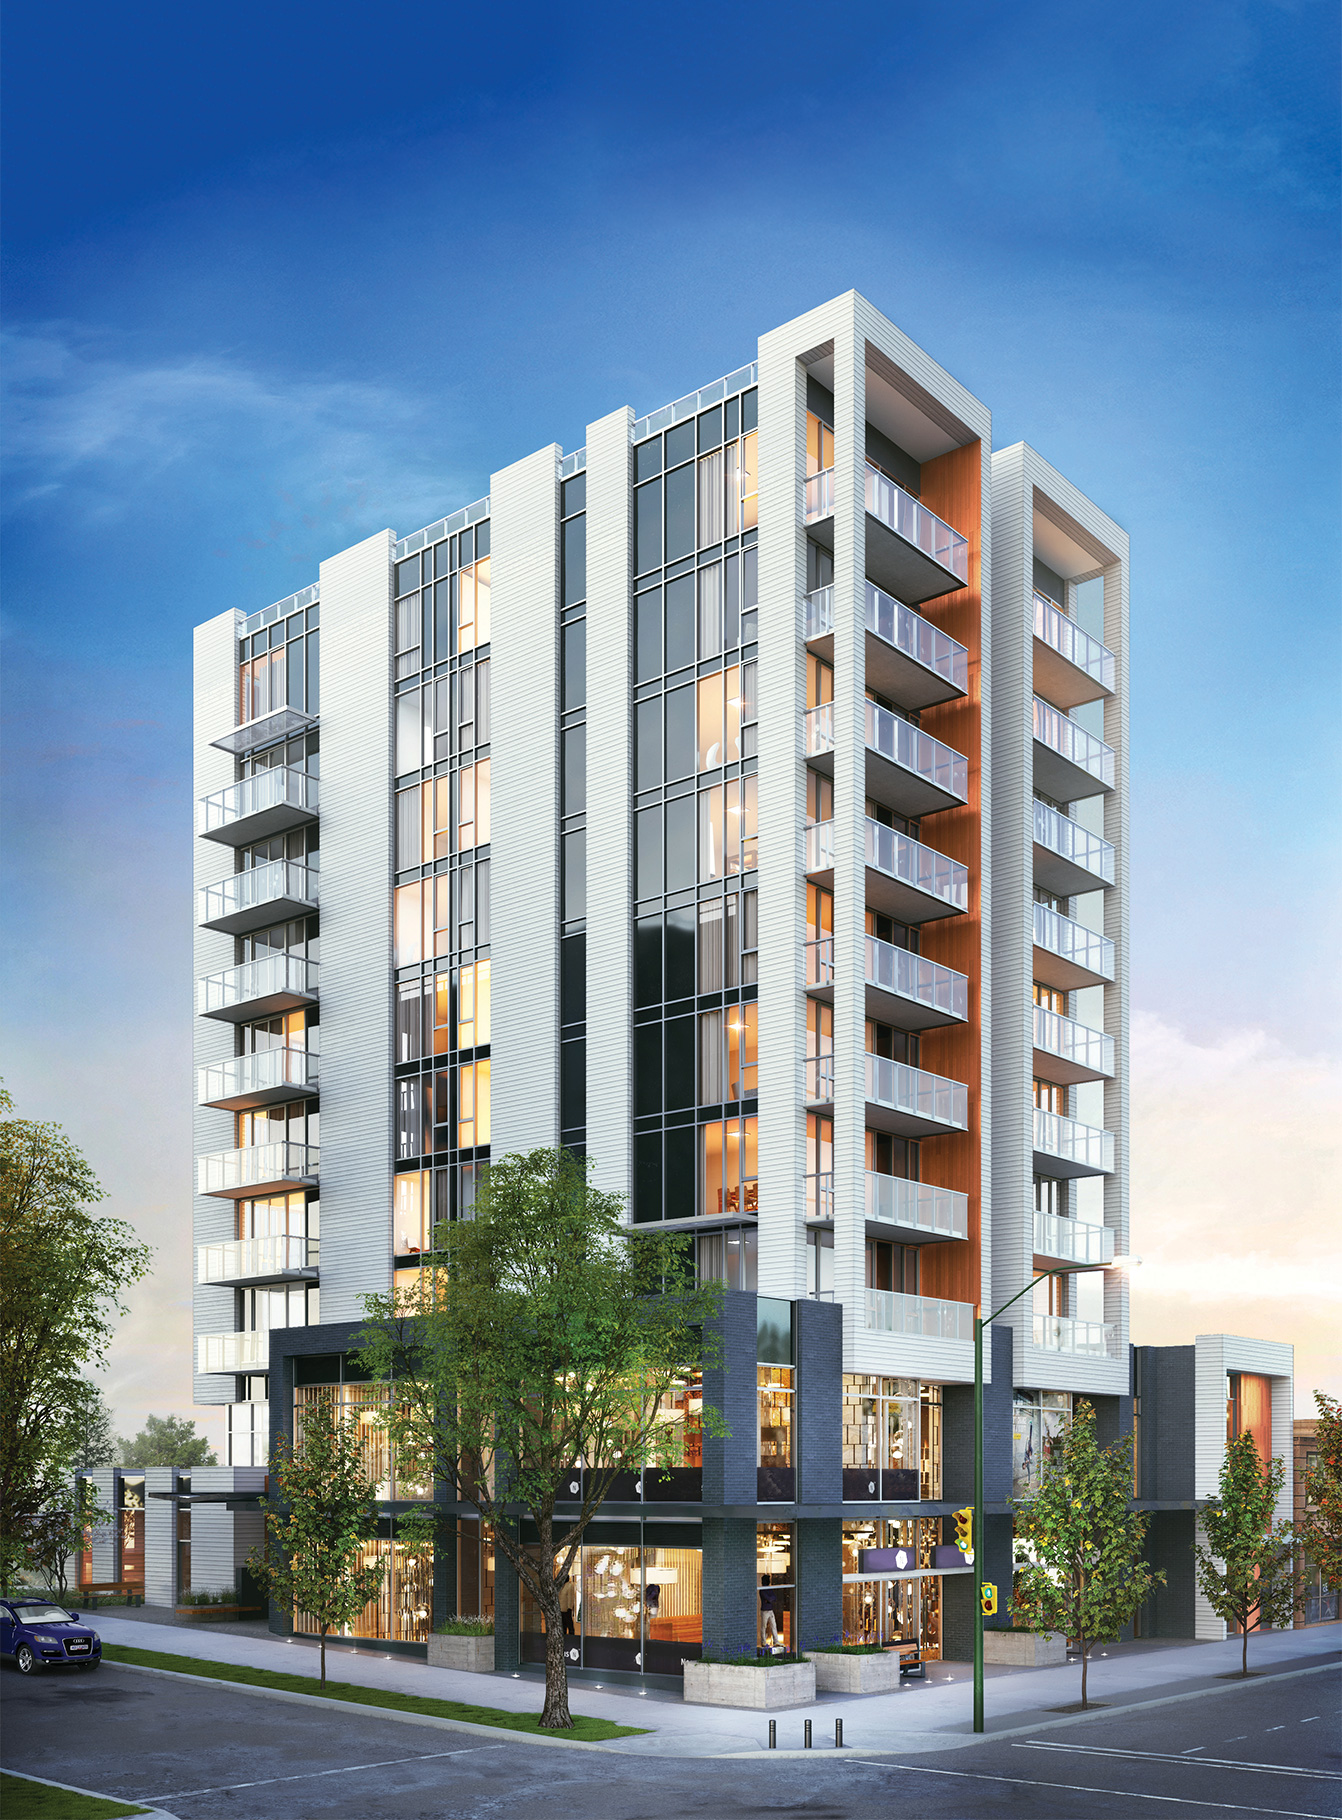 A new collection of 38 condominiums, with one to three bedrooms above two floors of commercial space, coming soon to Fairview.